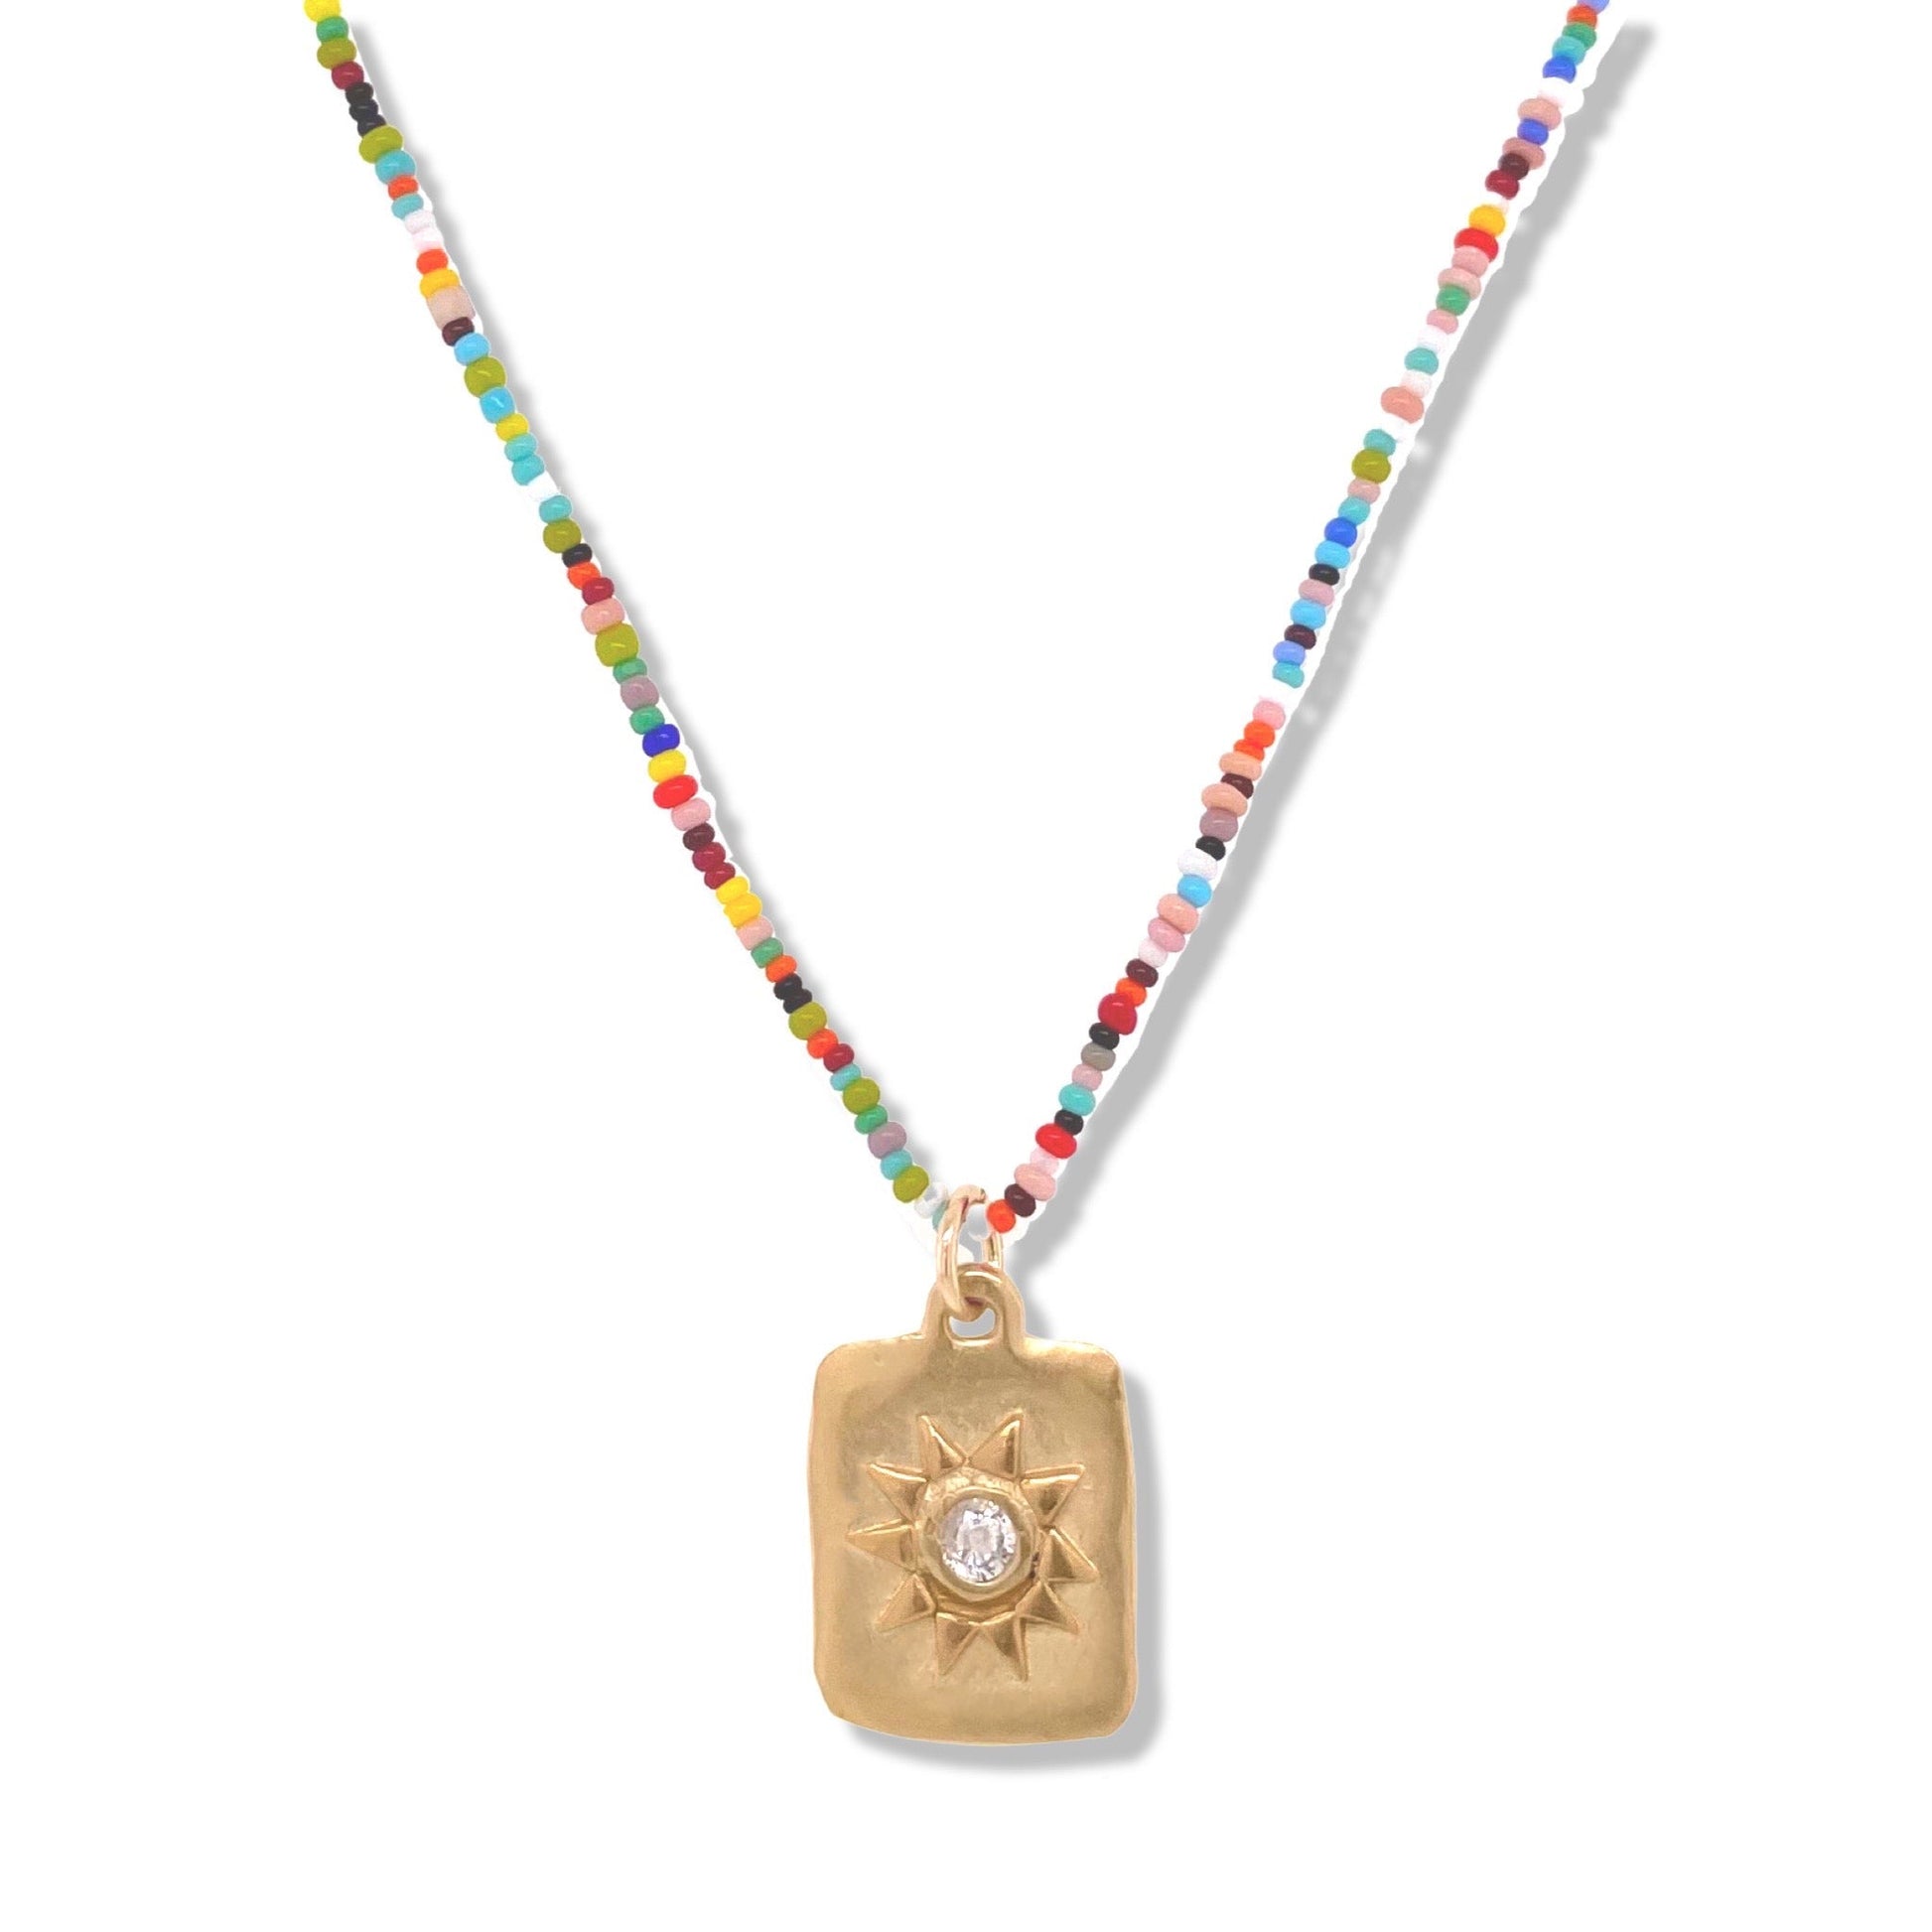 Ash Necklace in Gold on multi color beads | Nalu | Nantucket